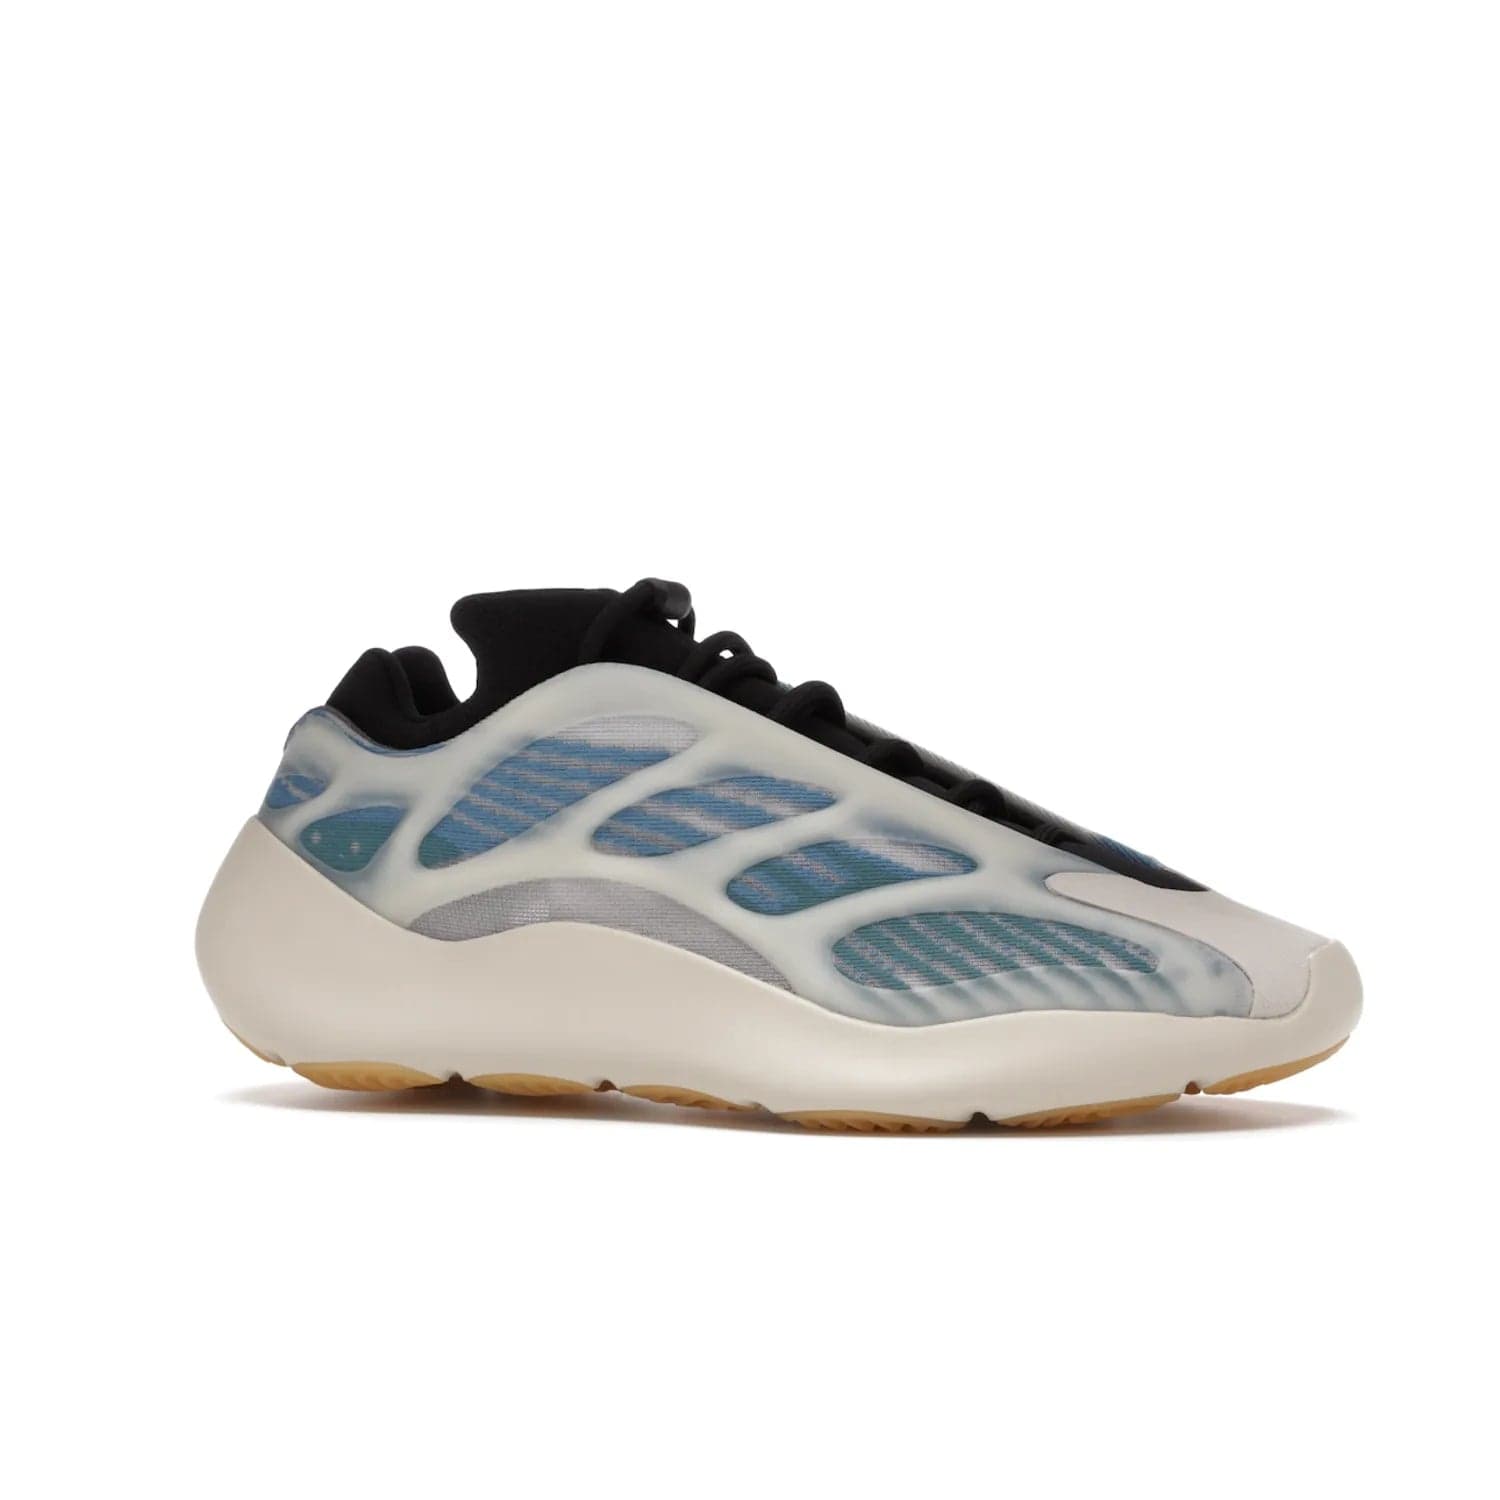 adidas Yeezy 700 V3 Kyanite - Image 3 - Only at www.BallersClubKickz.com - The adidas Yeezy 700 V3 Kyanite offers a layered design featuring a glow-in-the-dark TPU cage and a tonal cream-colored EVA foam midsole. With its herringbone-patterned outsole, the style and comfort of the sneaker will accompany you anywhere. Released in March 2021, it's a great addition to any sneaker wardrobe.